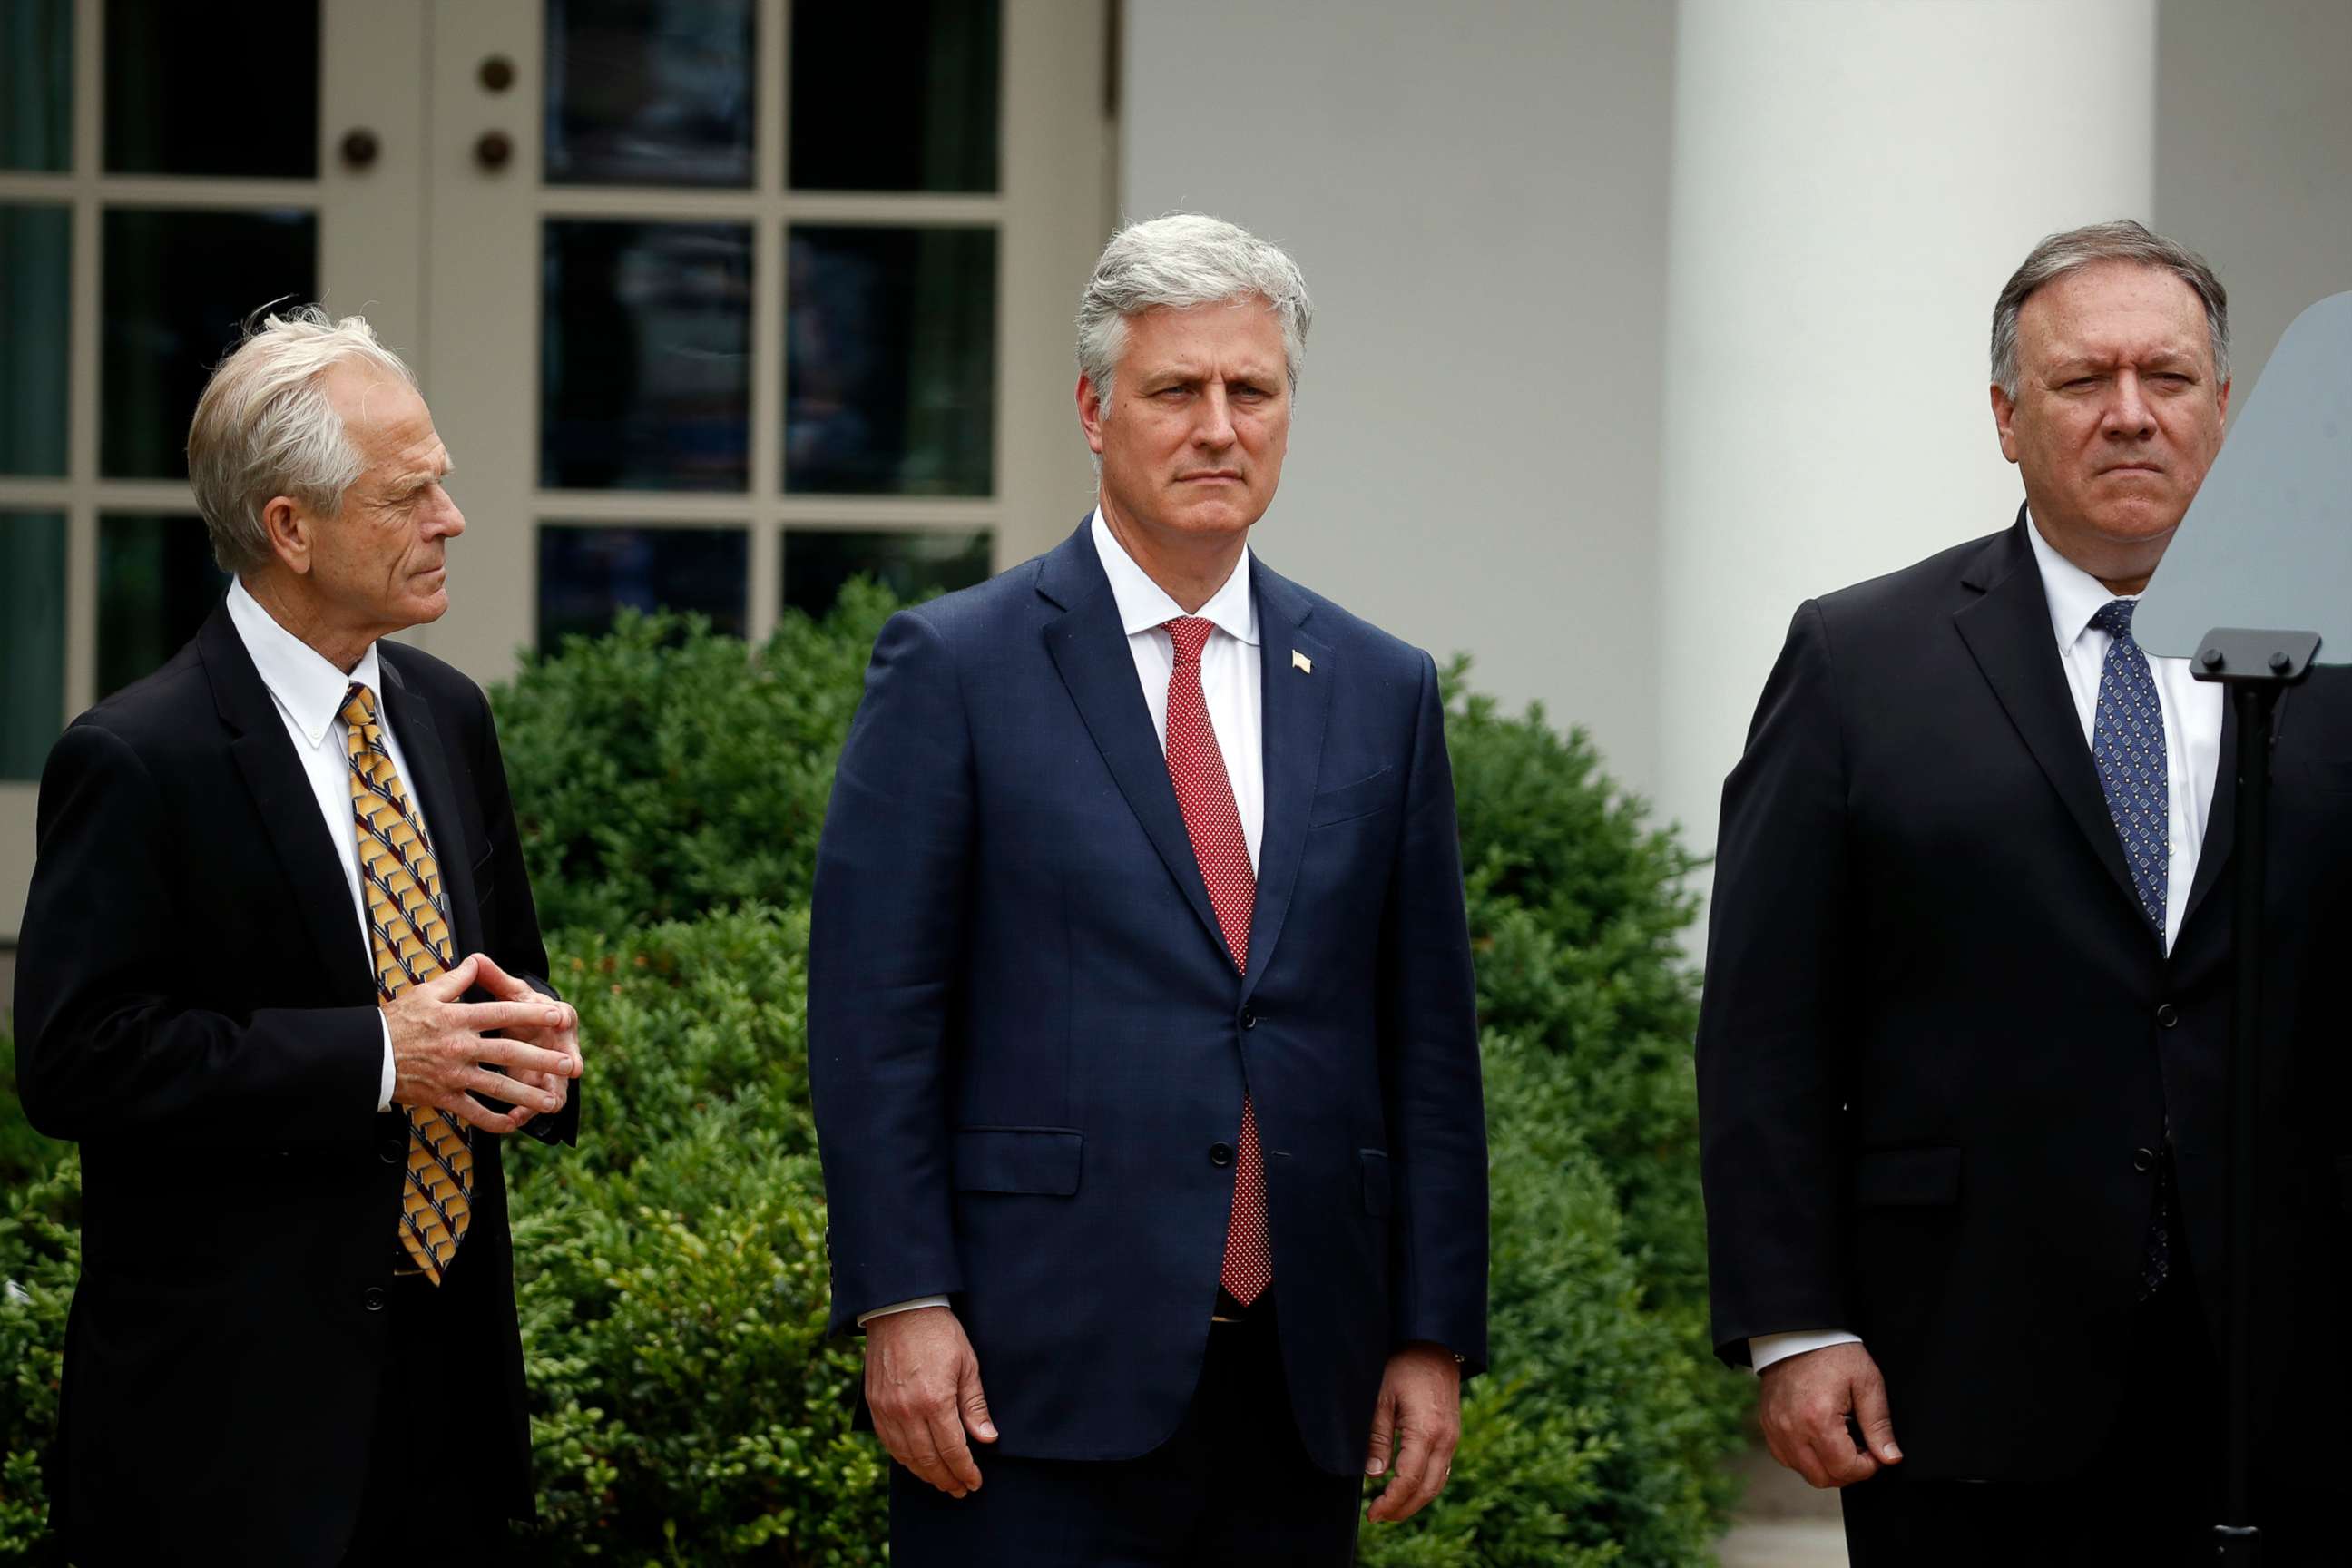 PHOTO: White House trade adviser Peter Navarro, White House national security adviser Robert O'Brien and Secretary of State Mike Pompeo listen as President Donald Trump speaks in the Rose Garden of the White House, May 29, 2020, in Washington.